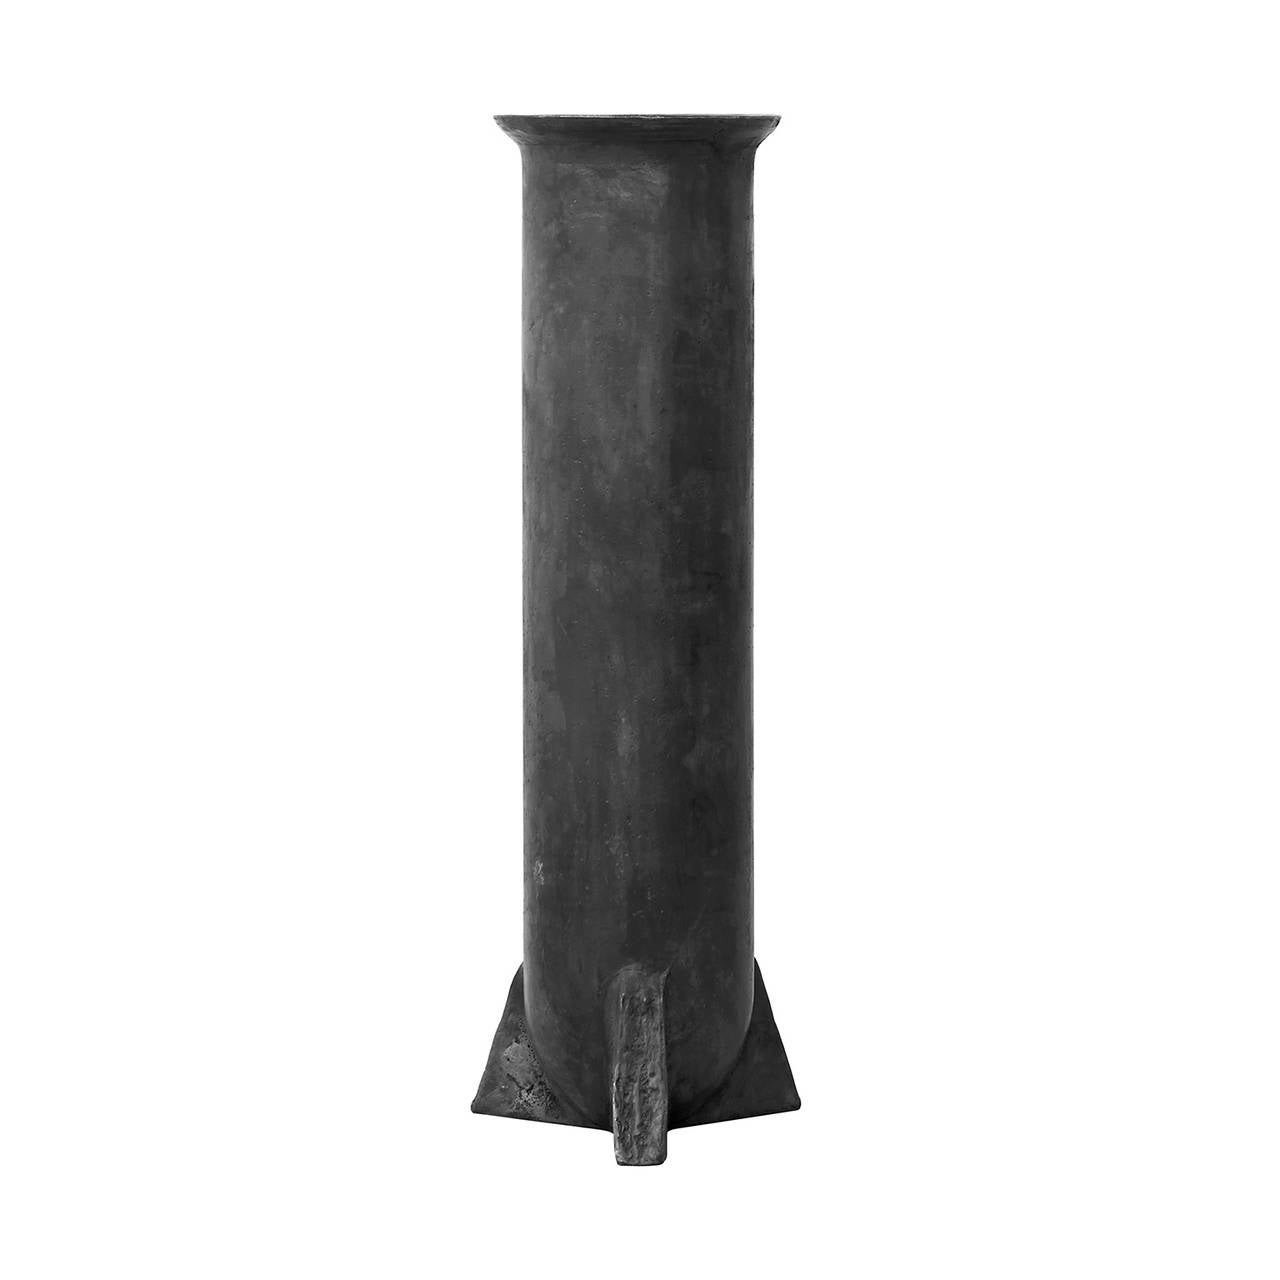 Rick Owens Home collection

Material: Bronze

Finish: Bronze (Brutalist), black, nitrate

Dimension:
19 W x 19 D x 52 H centimetres
7.5 W x 7.5 D x 20.5 H inches

Production date: 2007

Edition: Open.